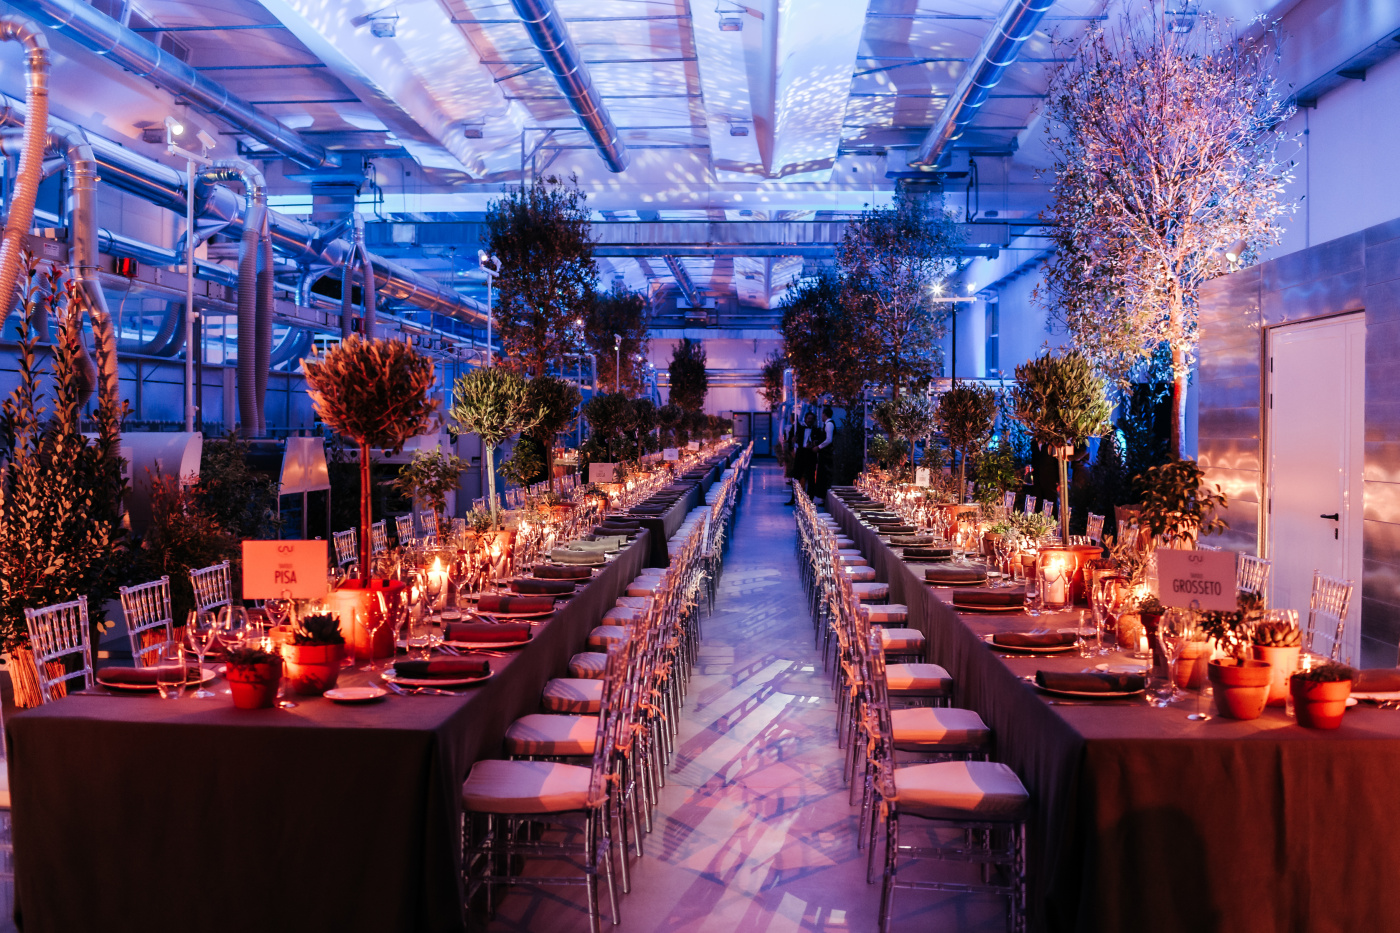 Company event with long tables and plants as decor